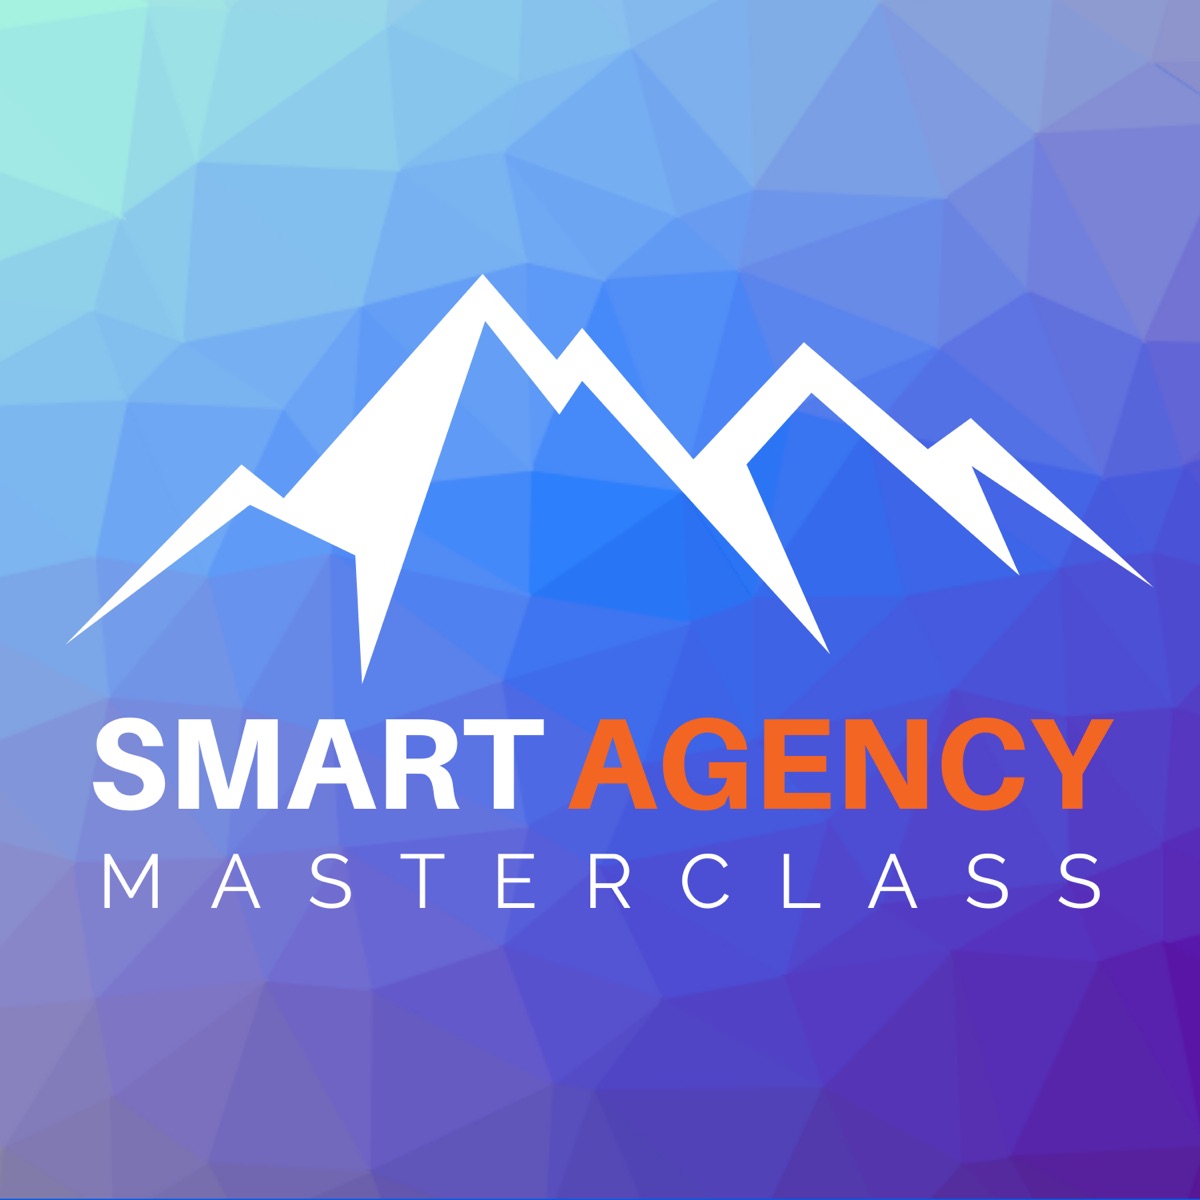 Smart Agency Masterclass with Jason Swenk: Podcast for Digital